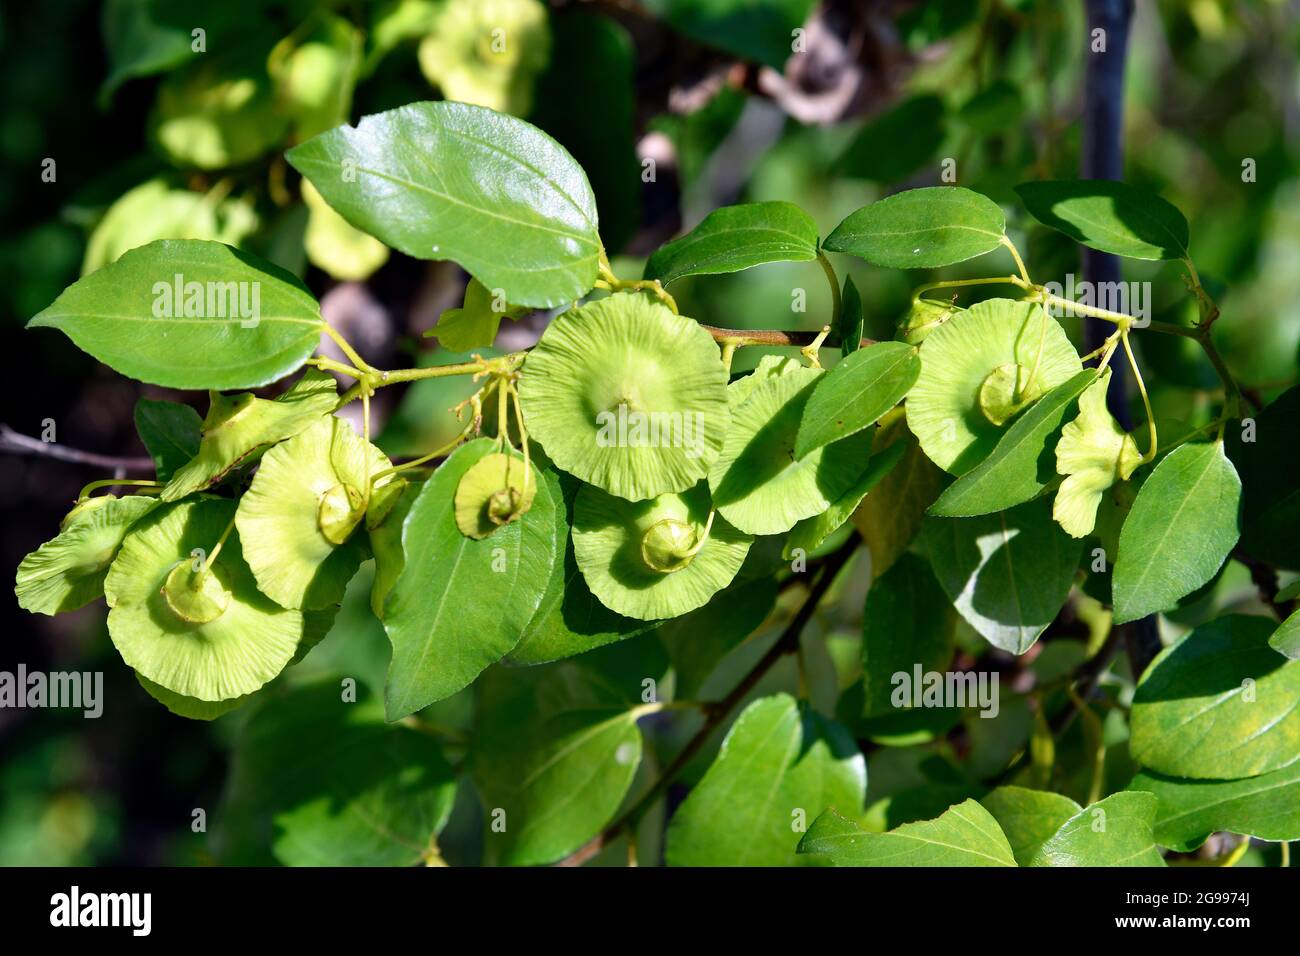 Greece, leaves and seeds of an Elm Tree on Lake Kerkini in Central Macedonia Stock Photo